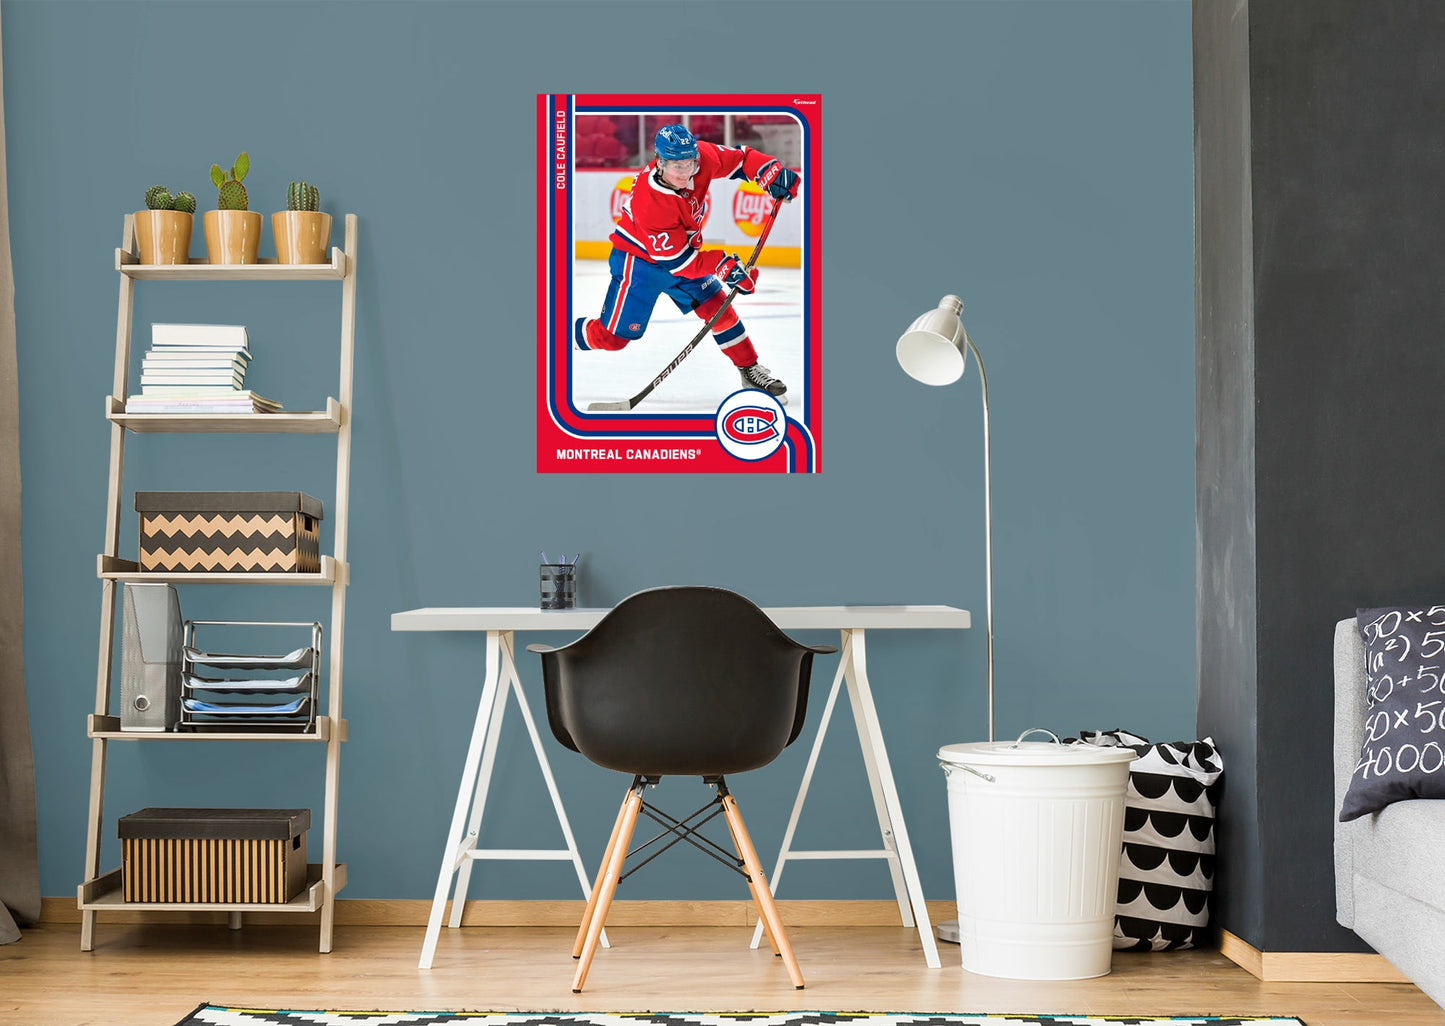 Montreal Canadiens: Cole Caufield Poster - Officially Licensed NHL Removable Adhesive Decal